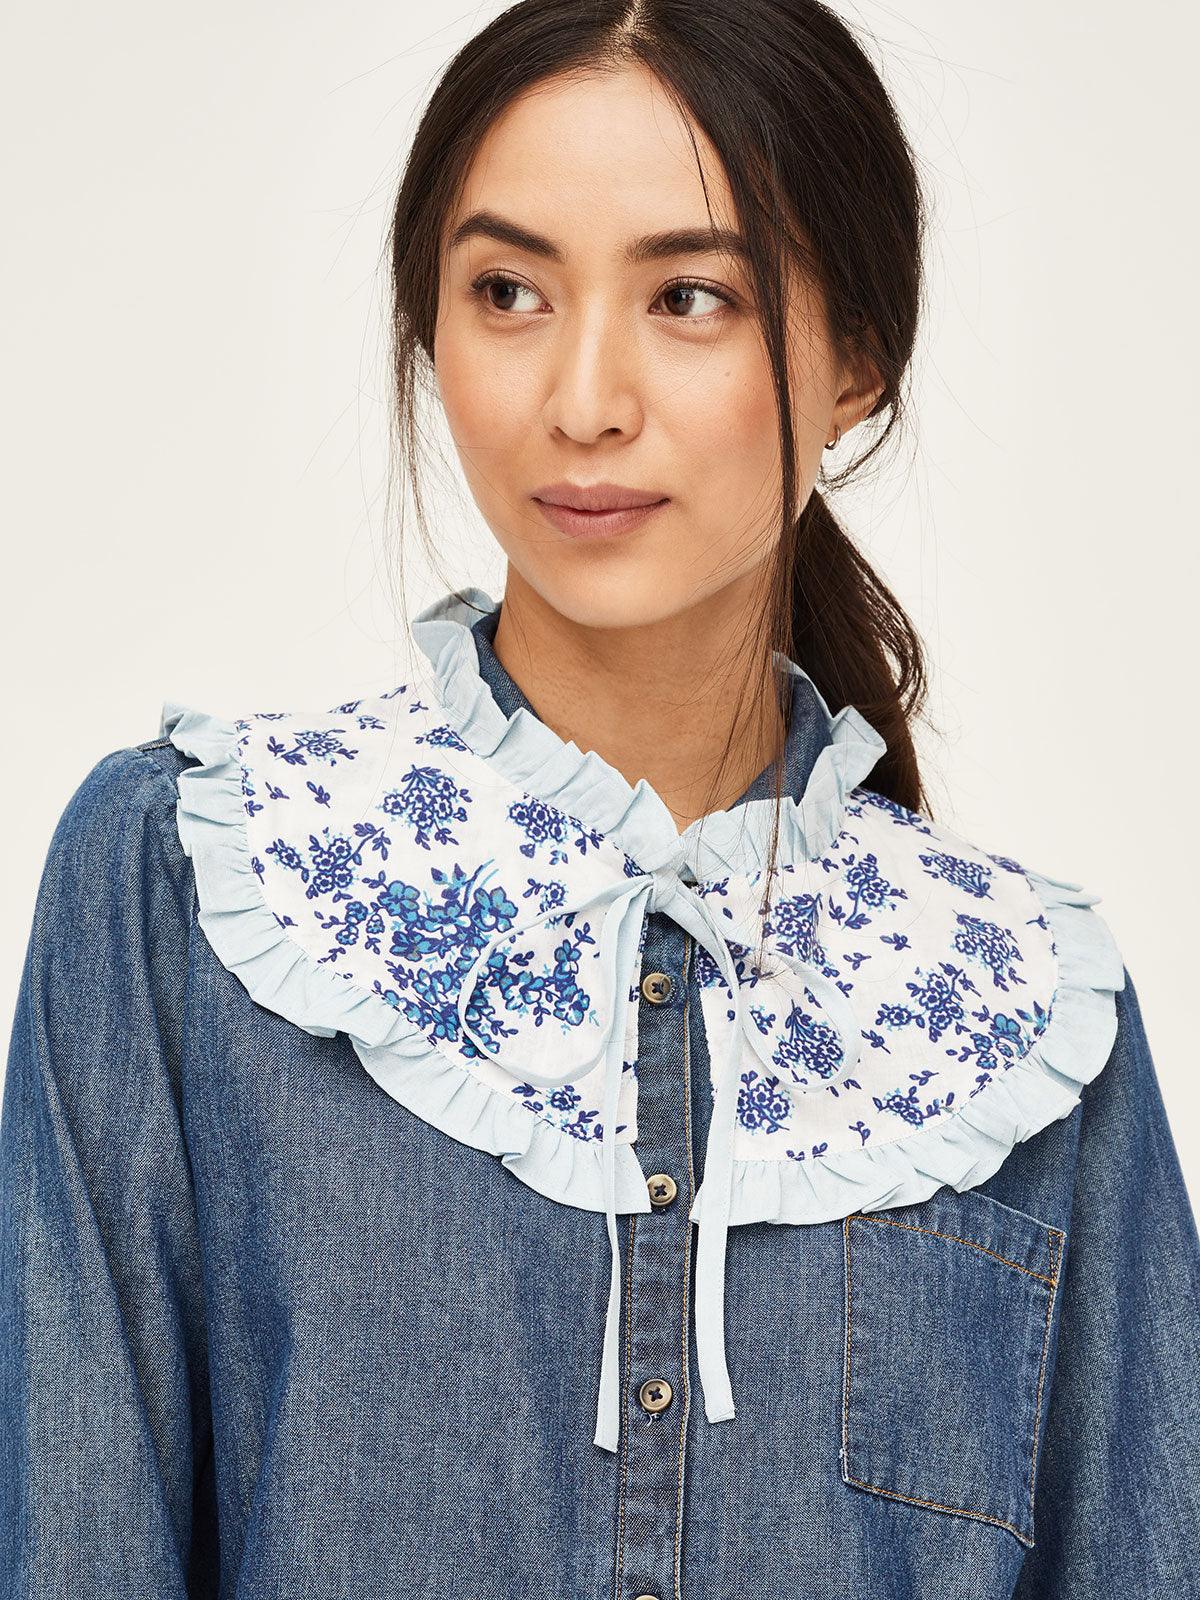 Aliis Rounded Tie Front Collar - Floral Blue - Thought Clothing UK